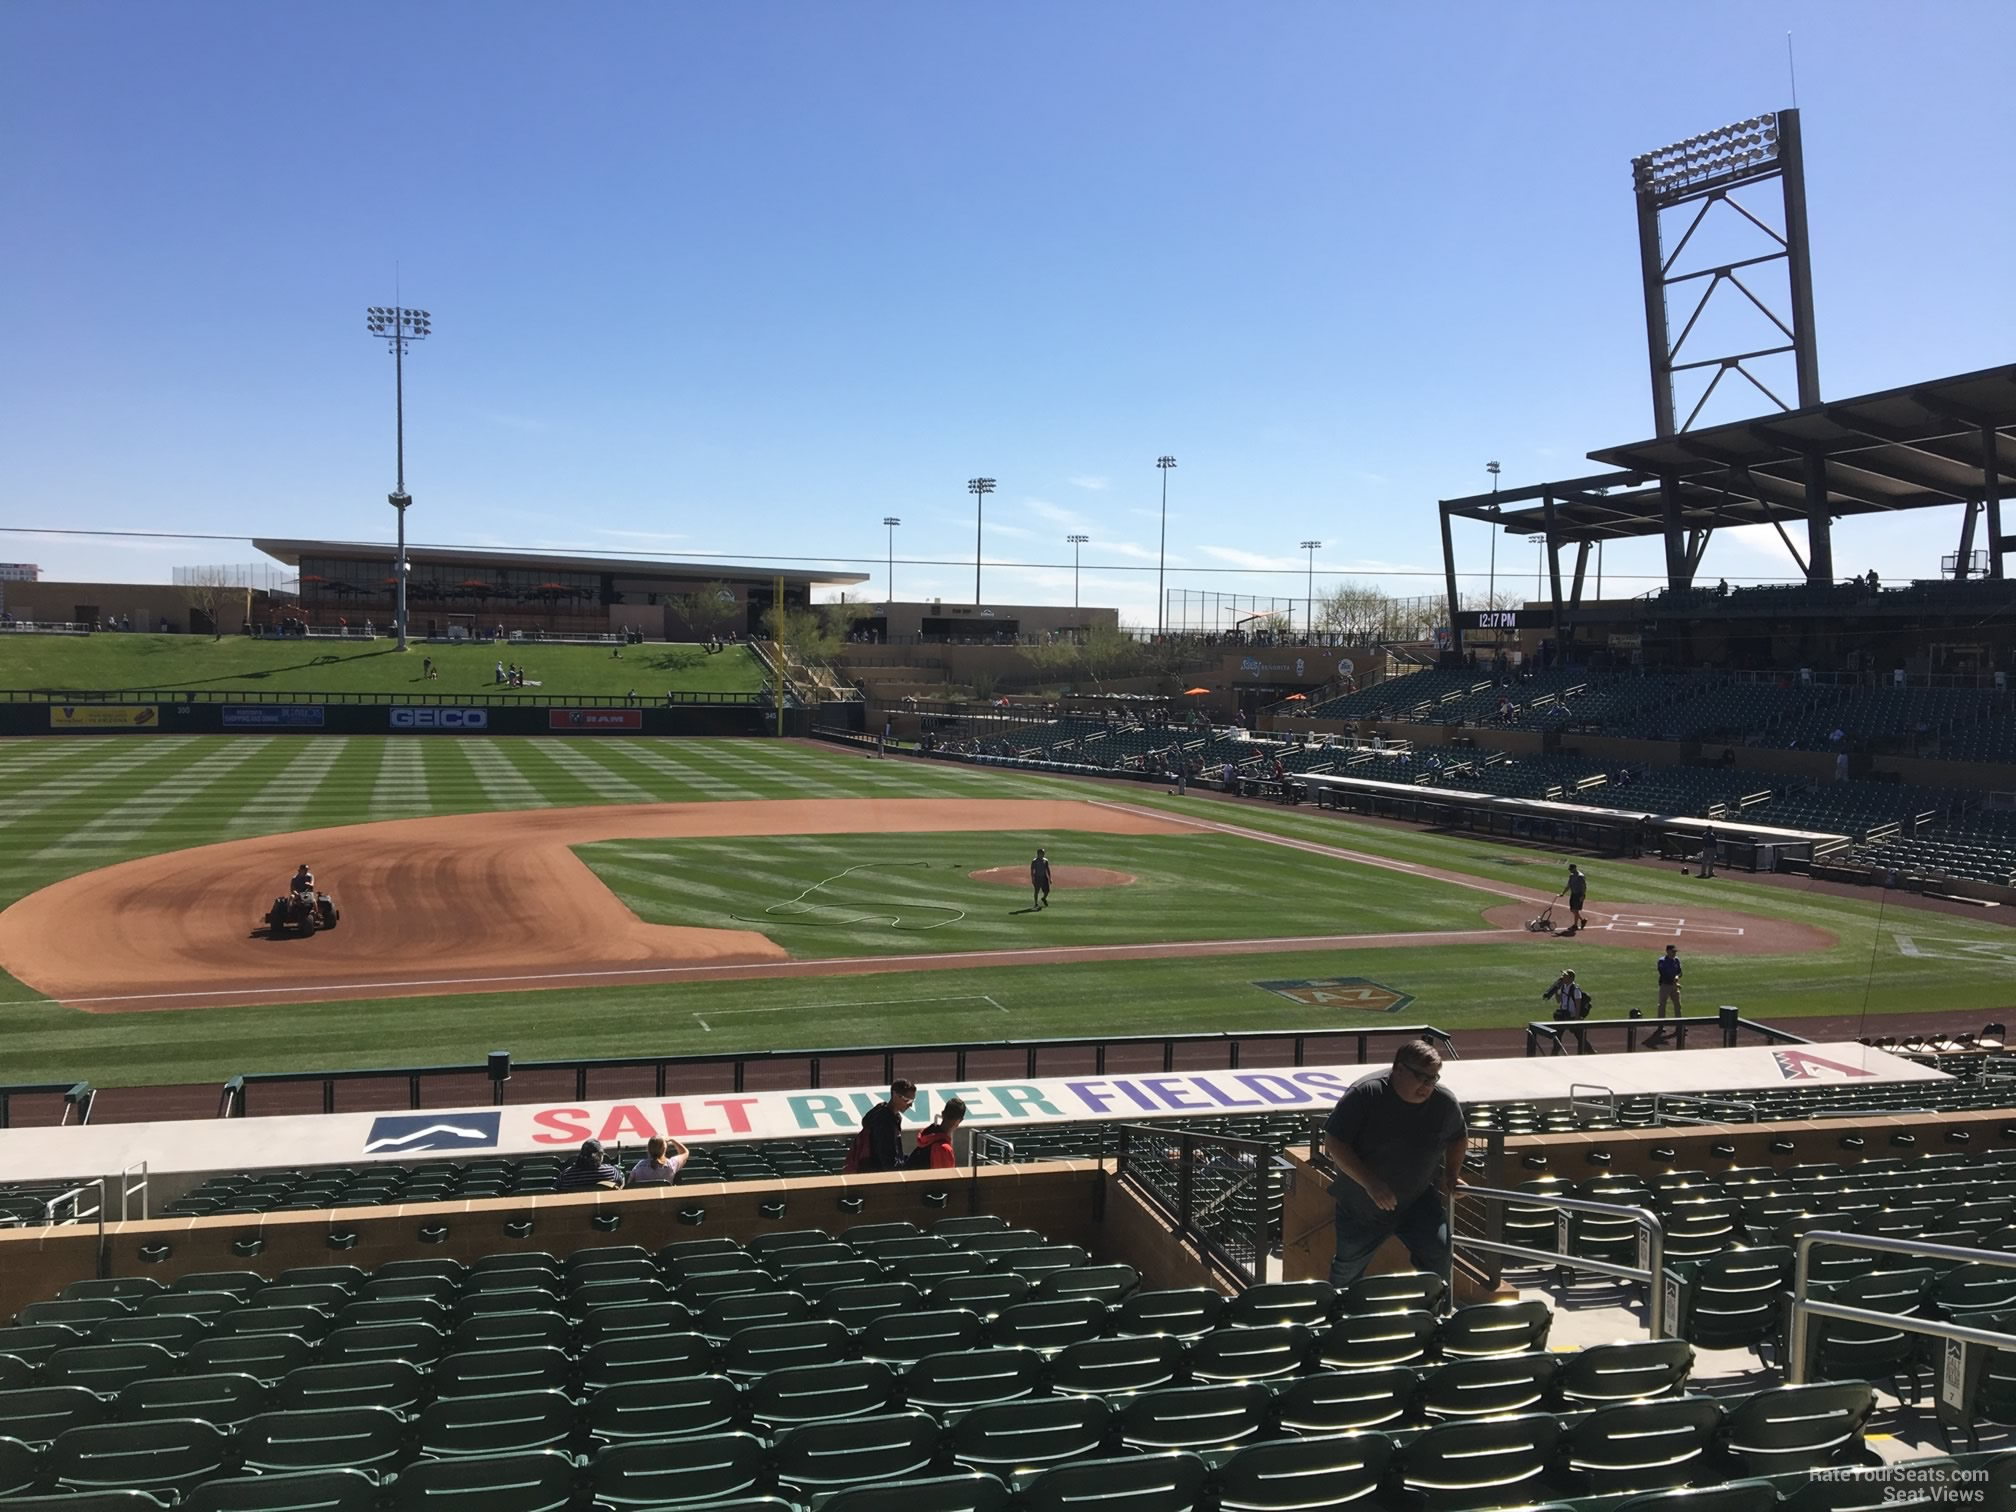 section 218, row 14 seat view  - salt river field at talking stick